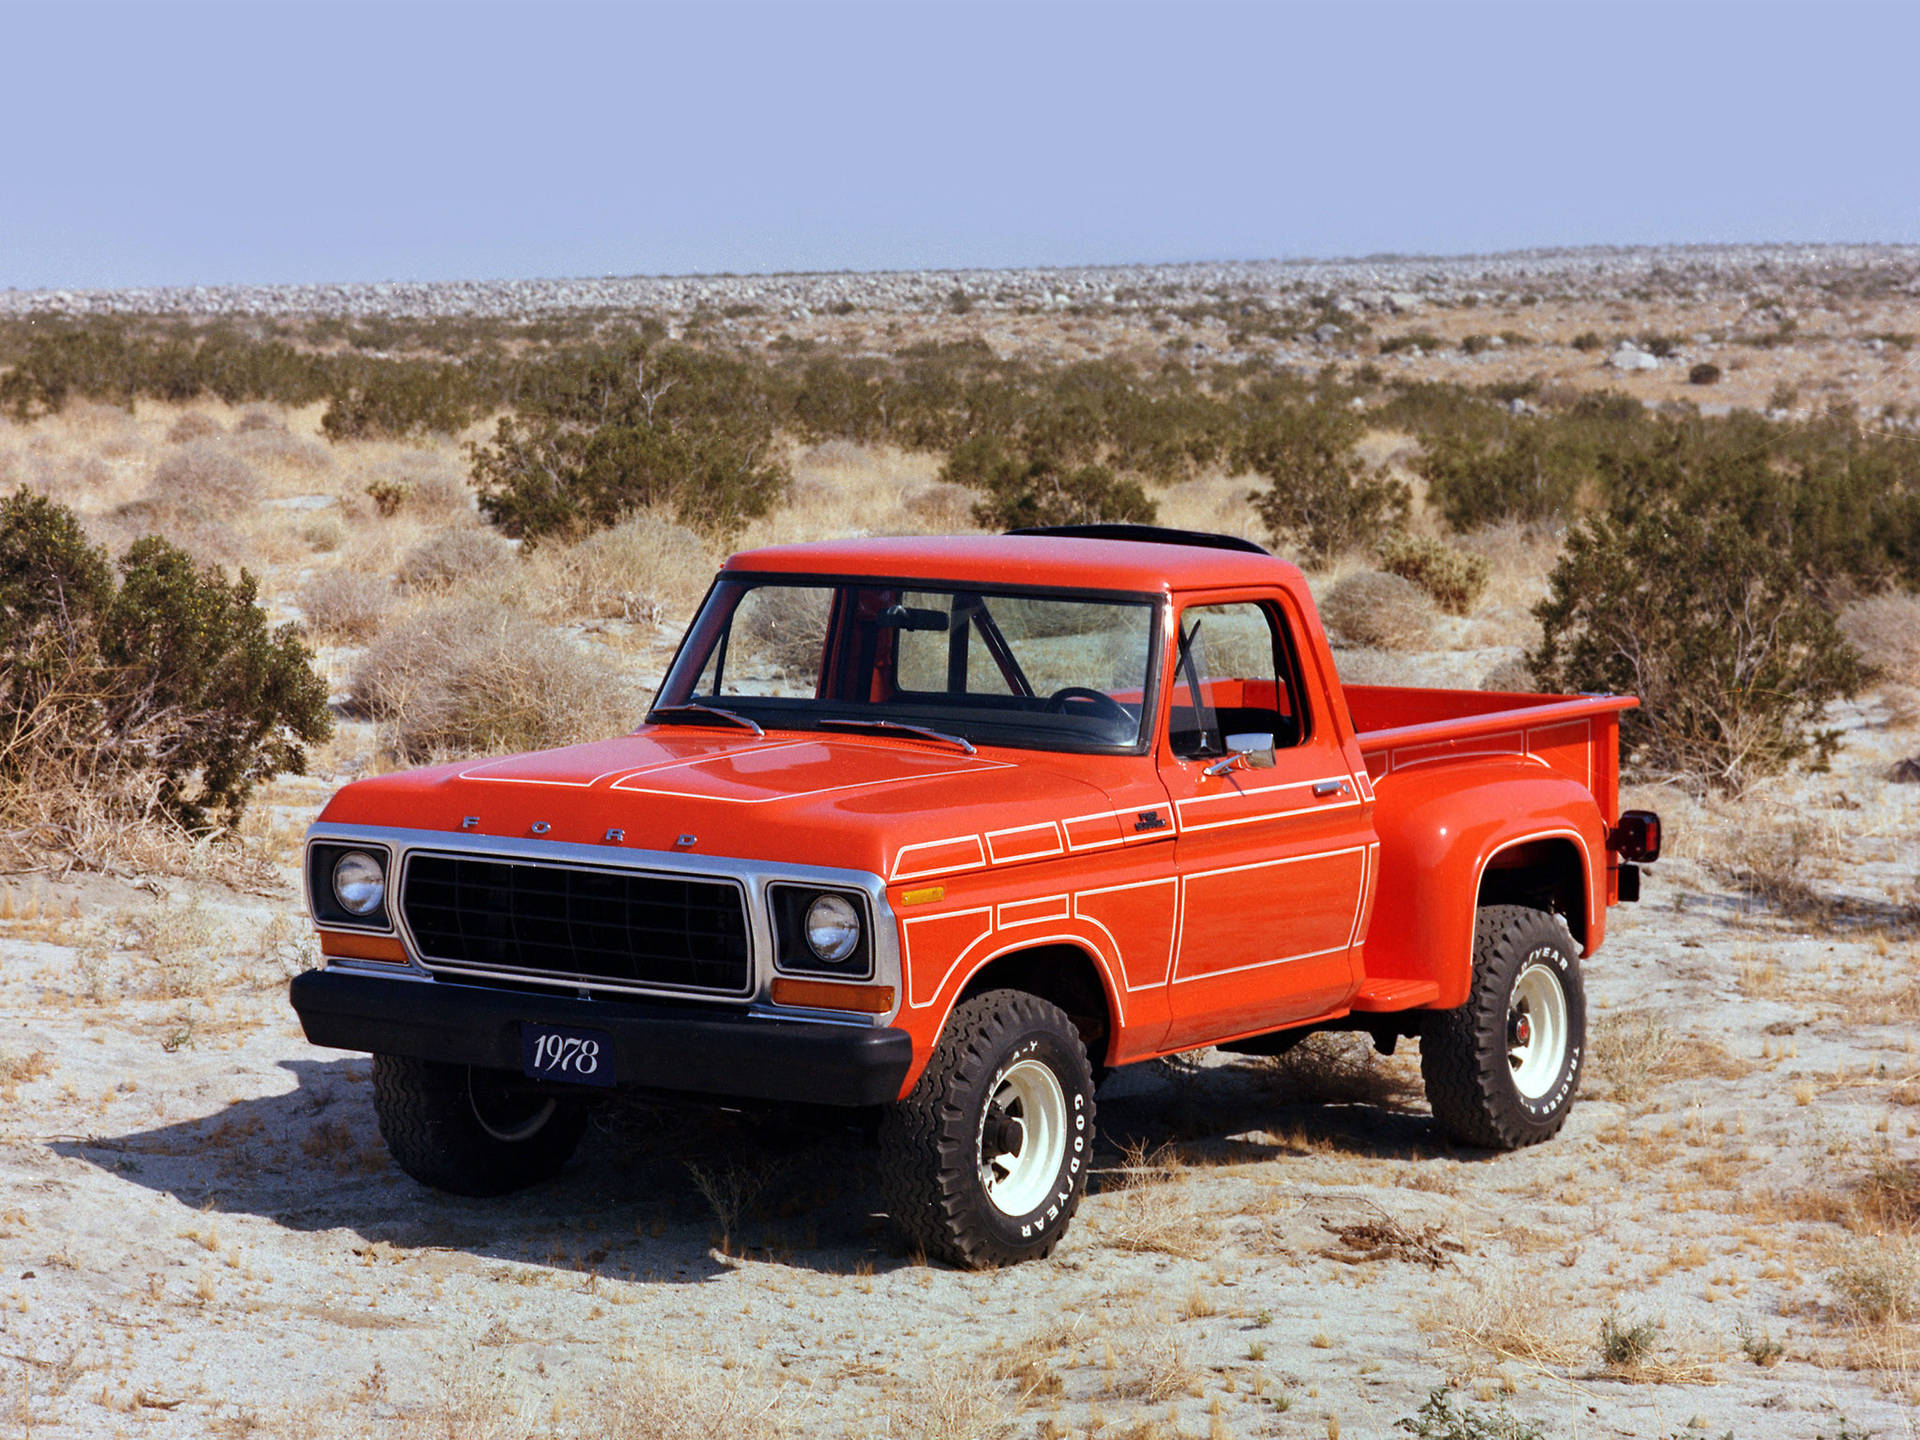 1978 Old Ford Truck